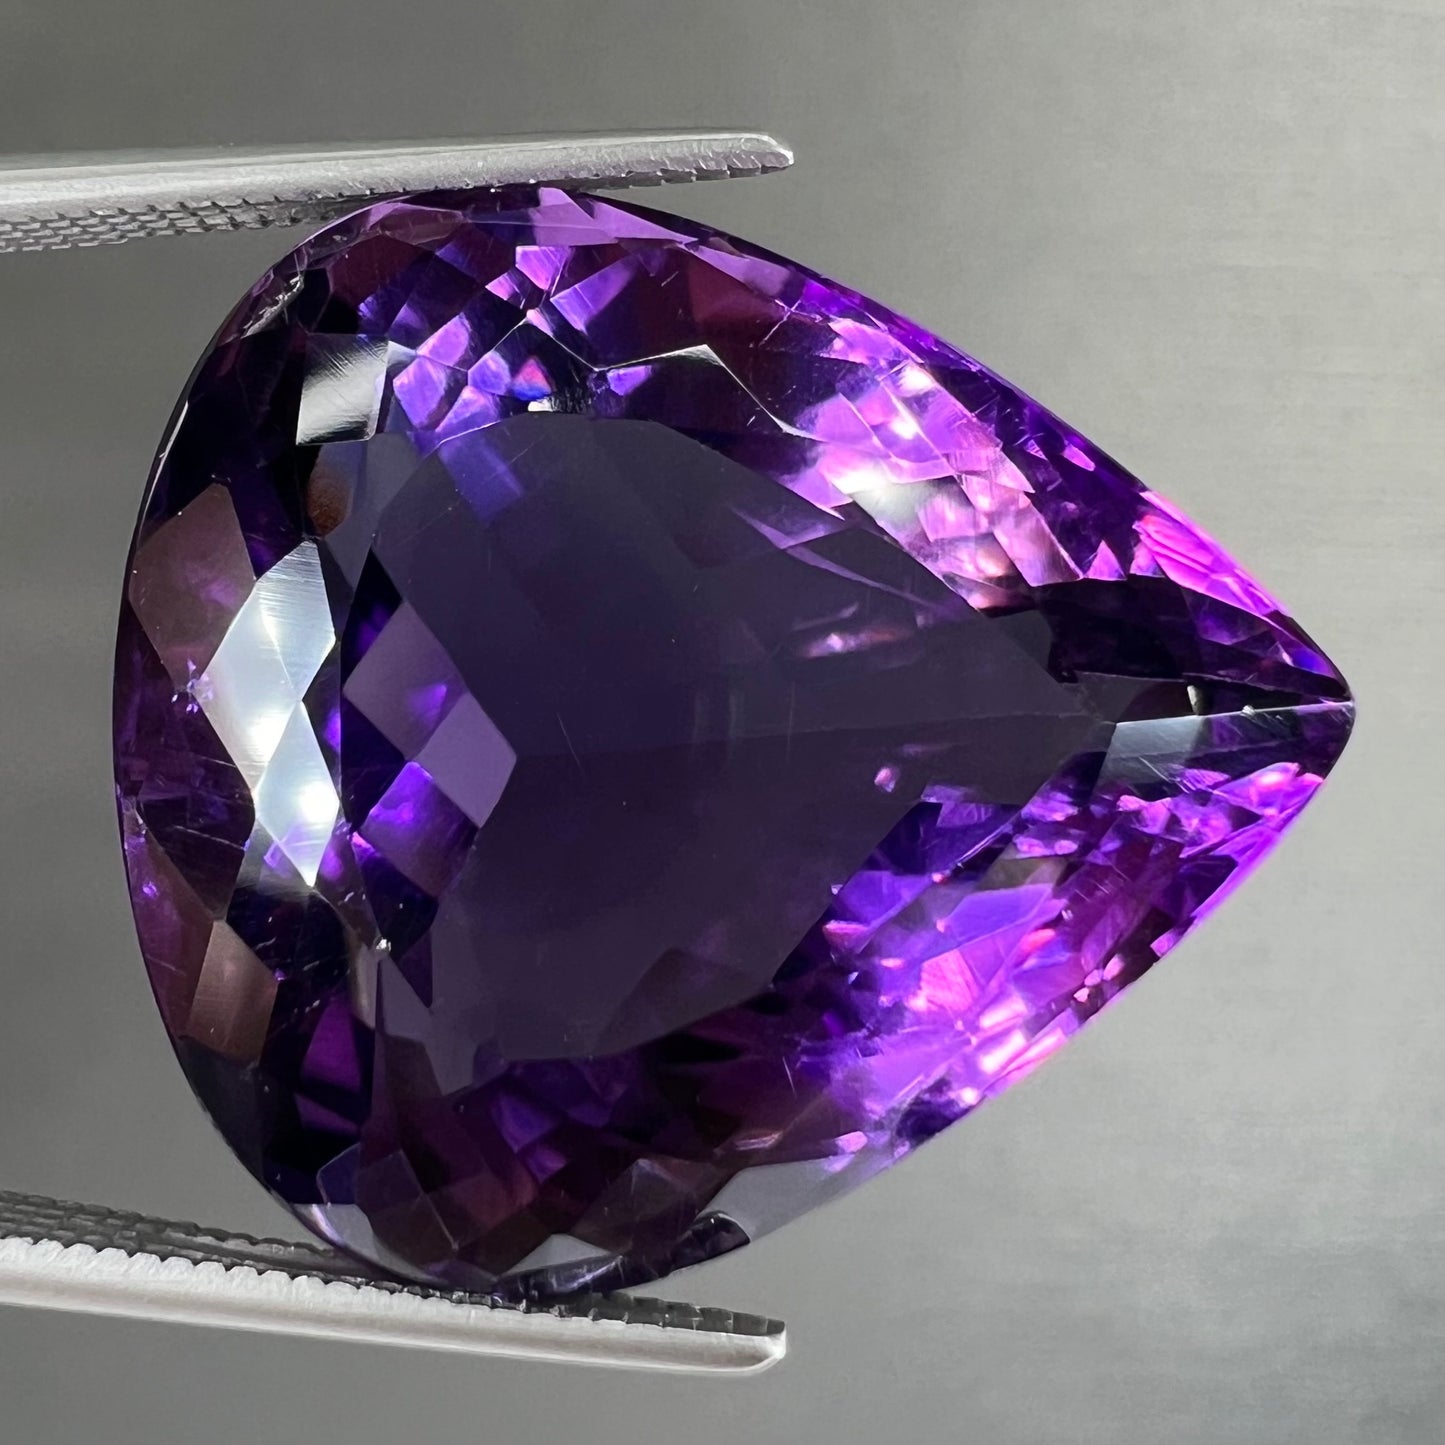 A large, pear shaped amethyst gemstone.  The stone is a dark purple color.